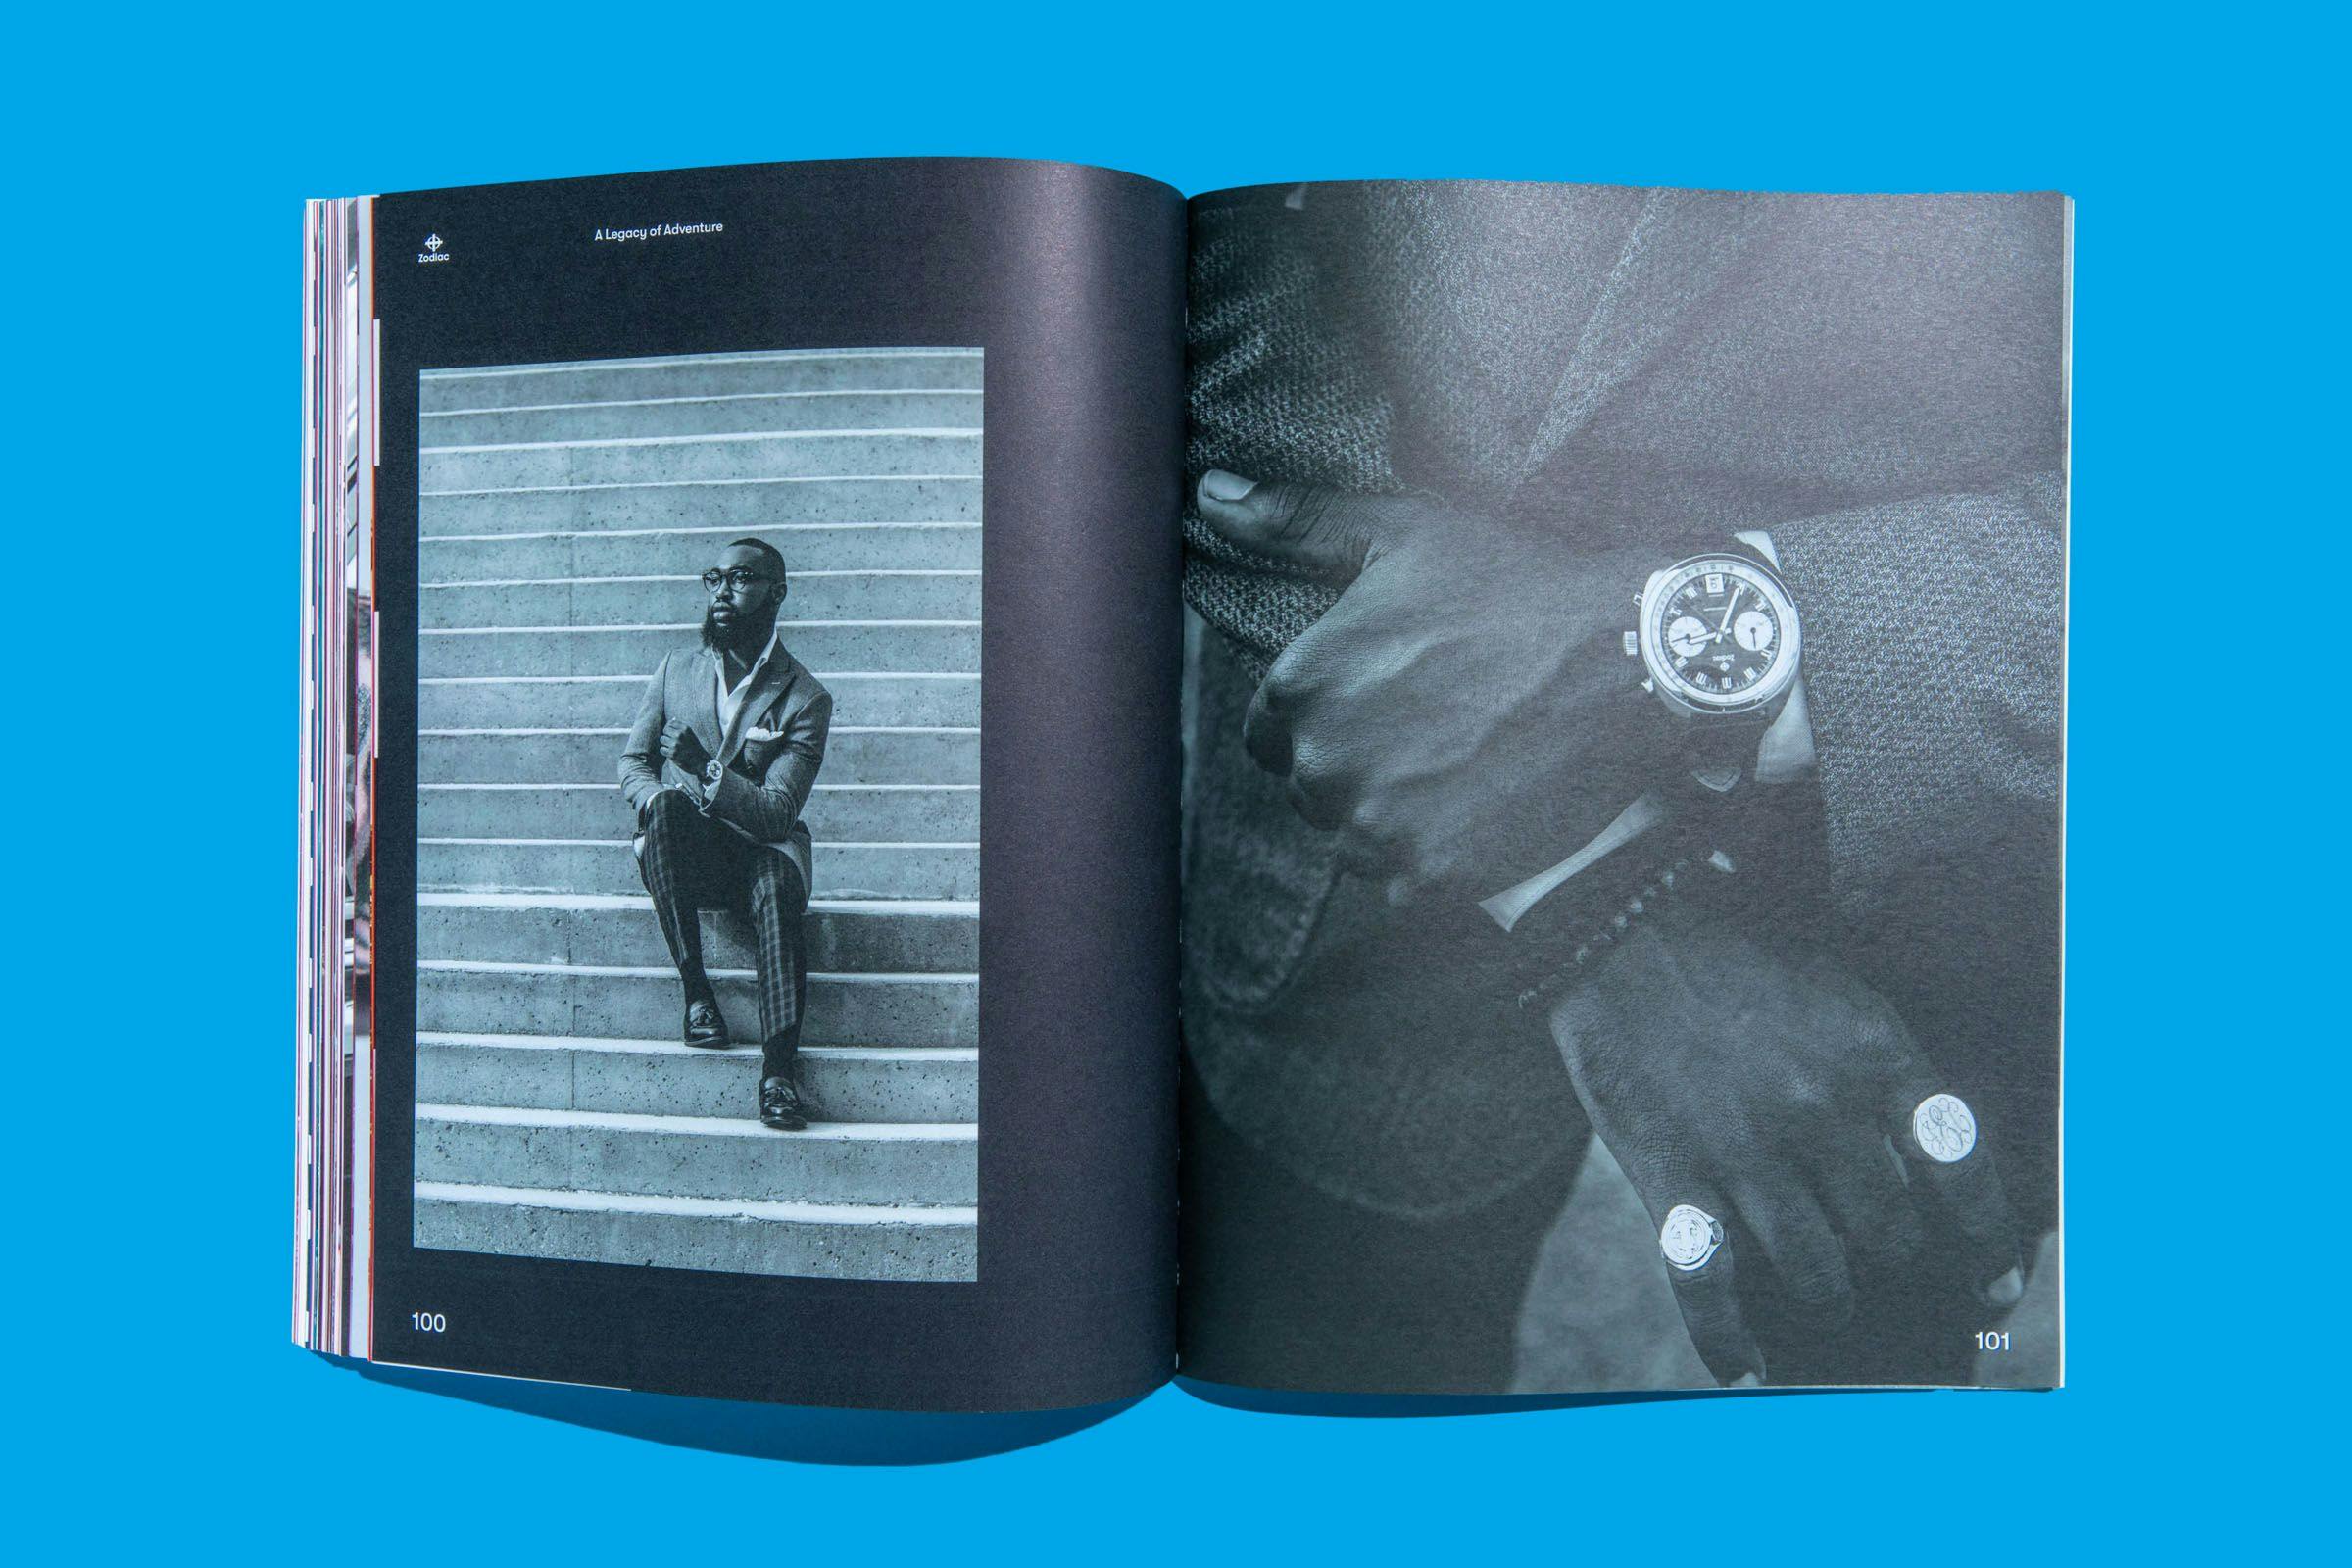 Pages from the Zodiac Watches: Brand Book featuring monochromatic photos